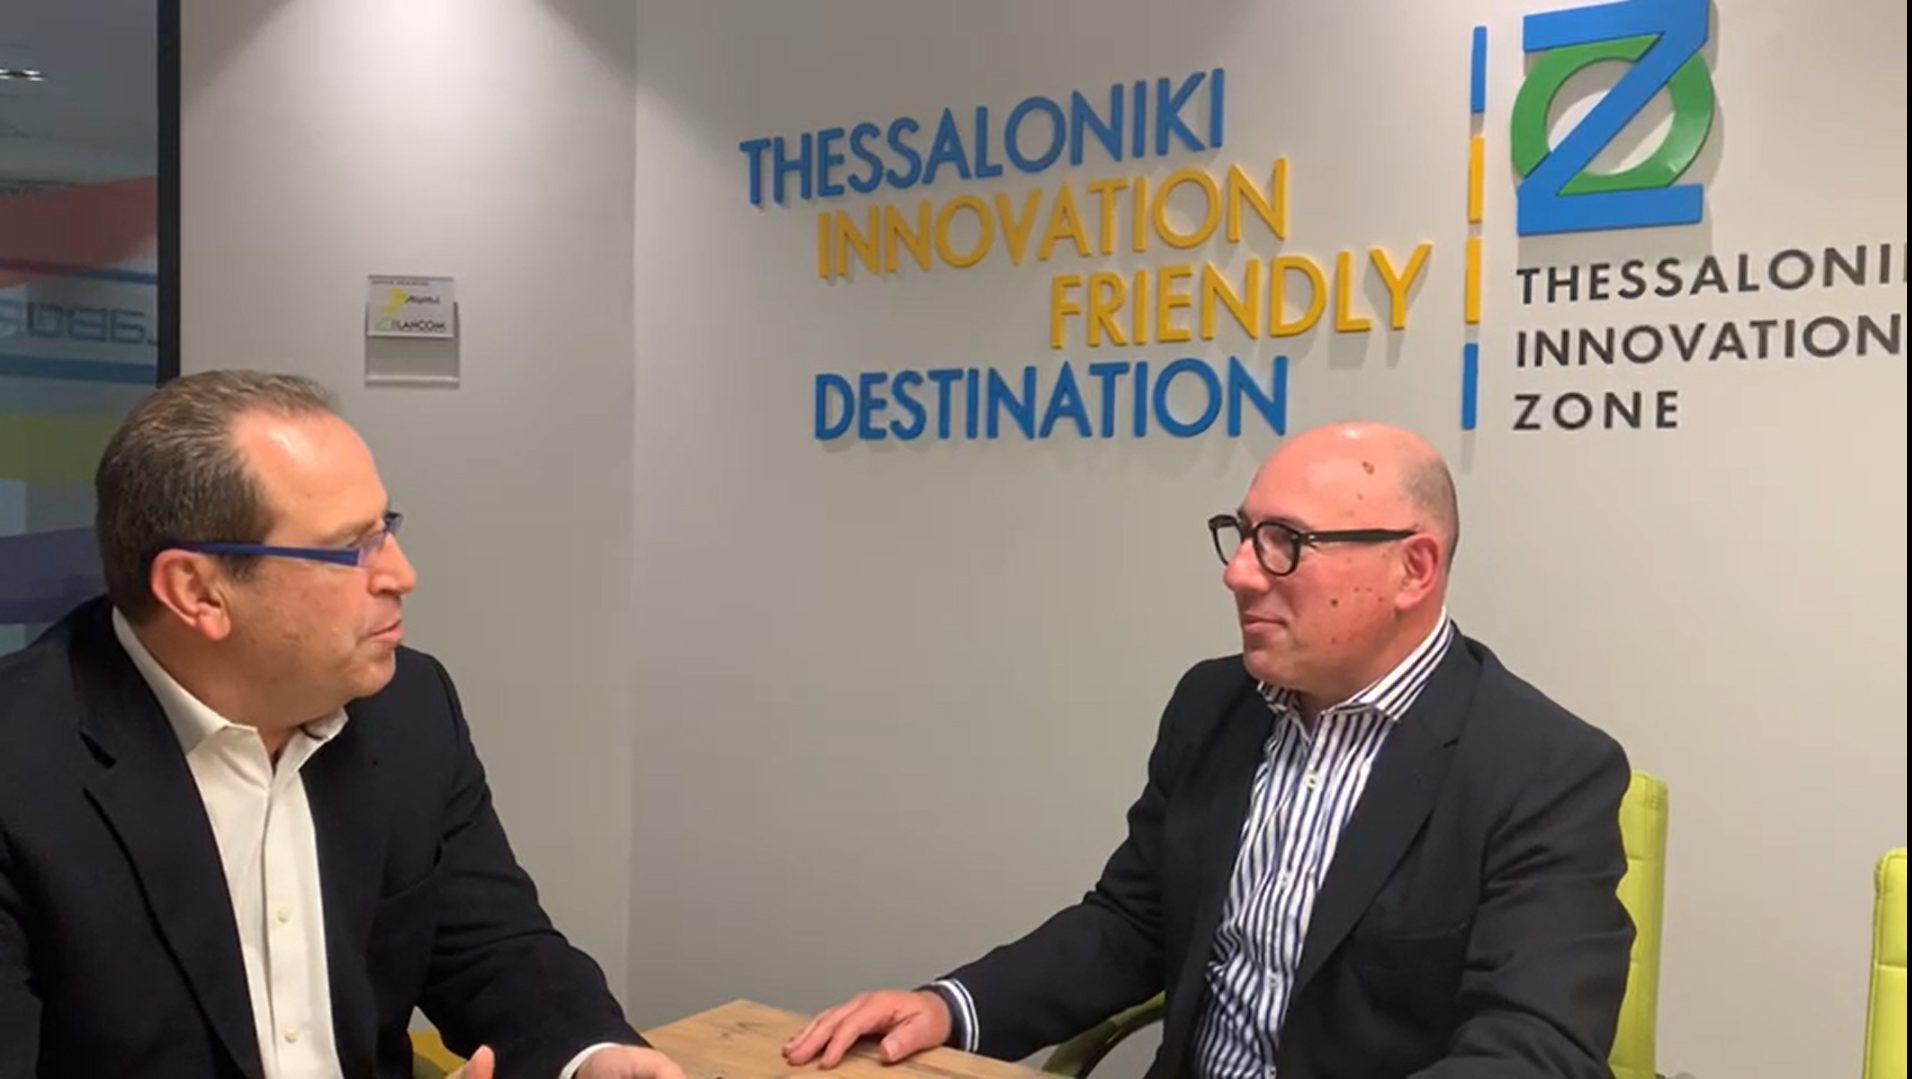 Watch the #1 part of Nick Gonios’ interview at Thessaloniki Innovation Zone!